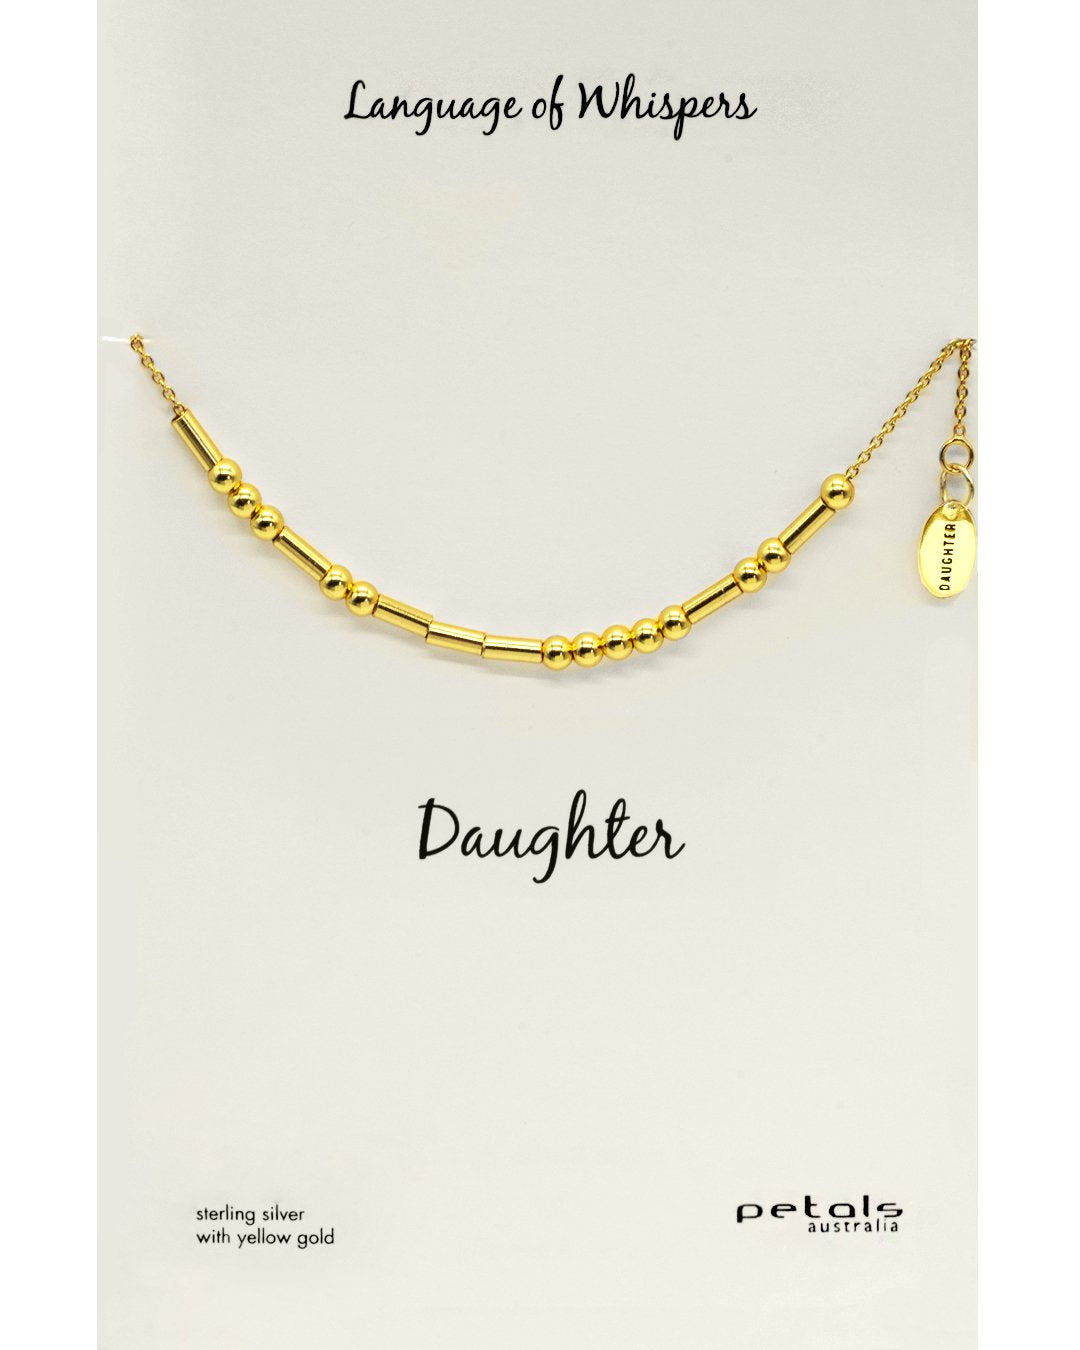 Daughter Morse Code Necklace